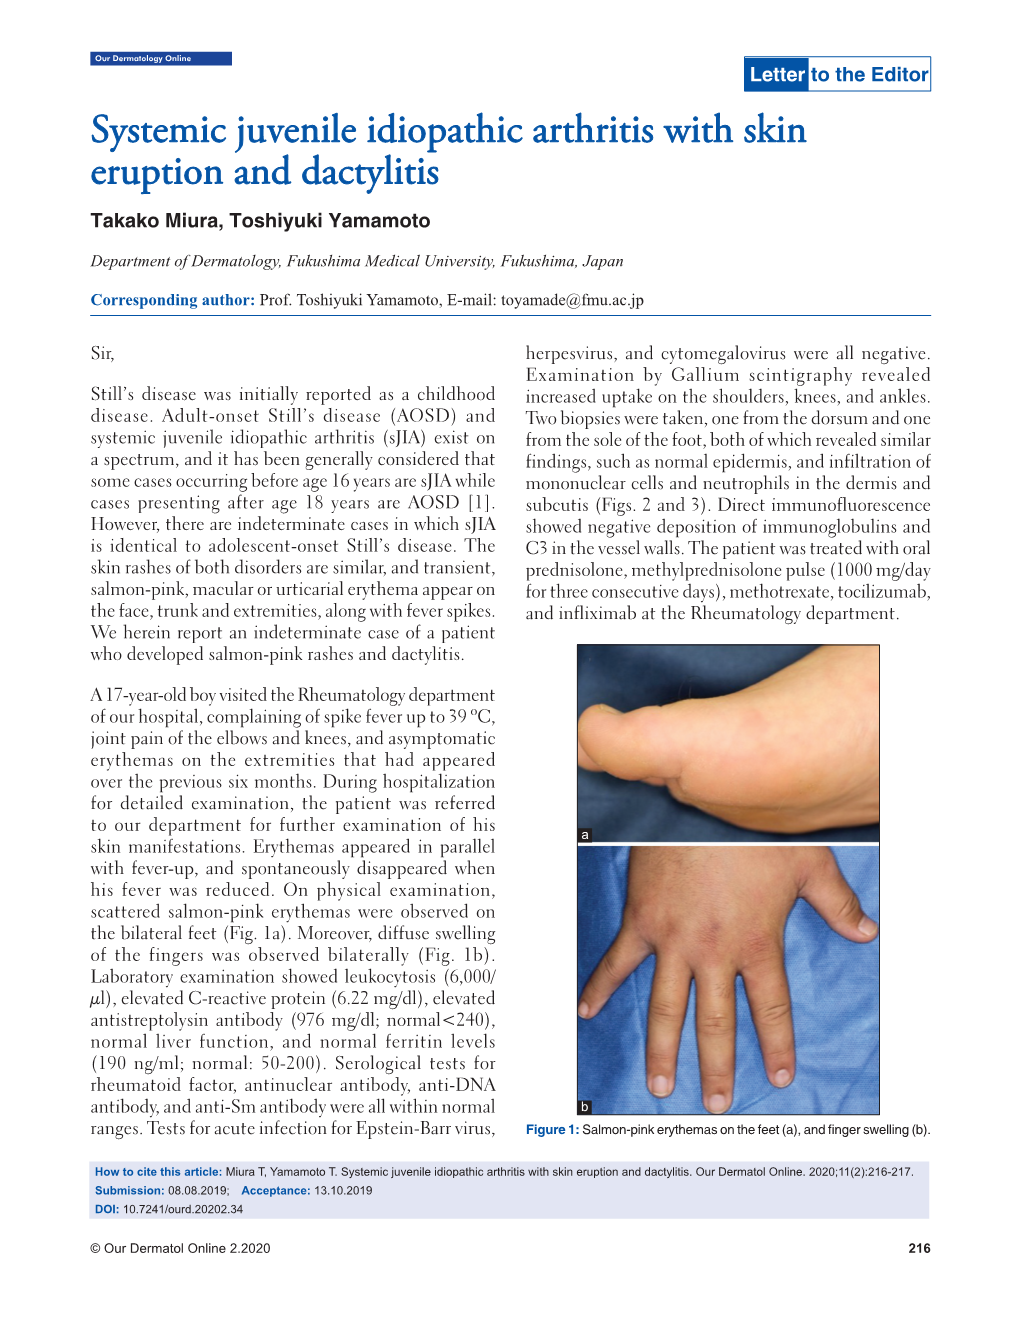 Systemic Juvenile Idiopathic Arthritis with Skin Eruption and Dactylitis